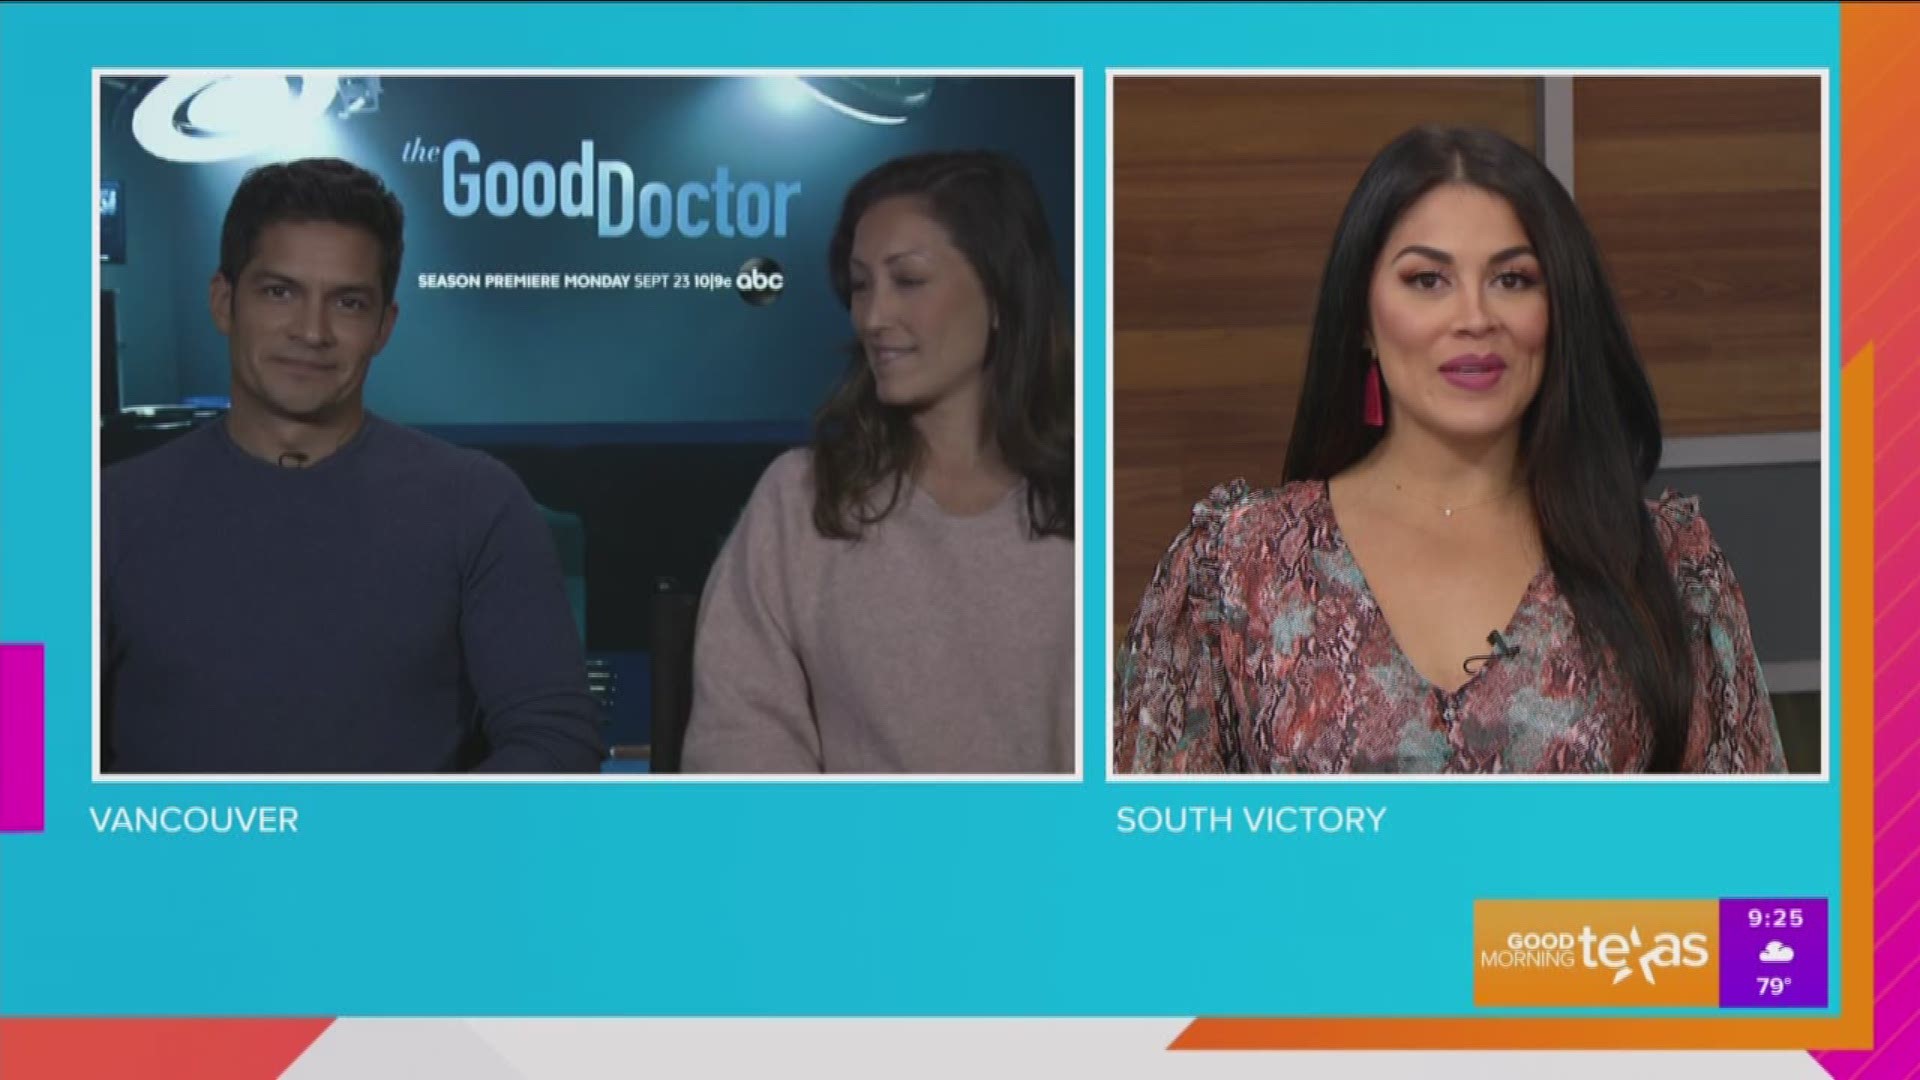 "The Good Doctor" premieres Monday at 9 p.m. right here on WFAA